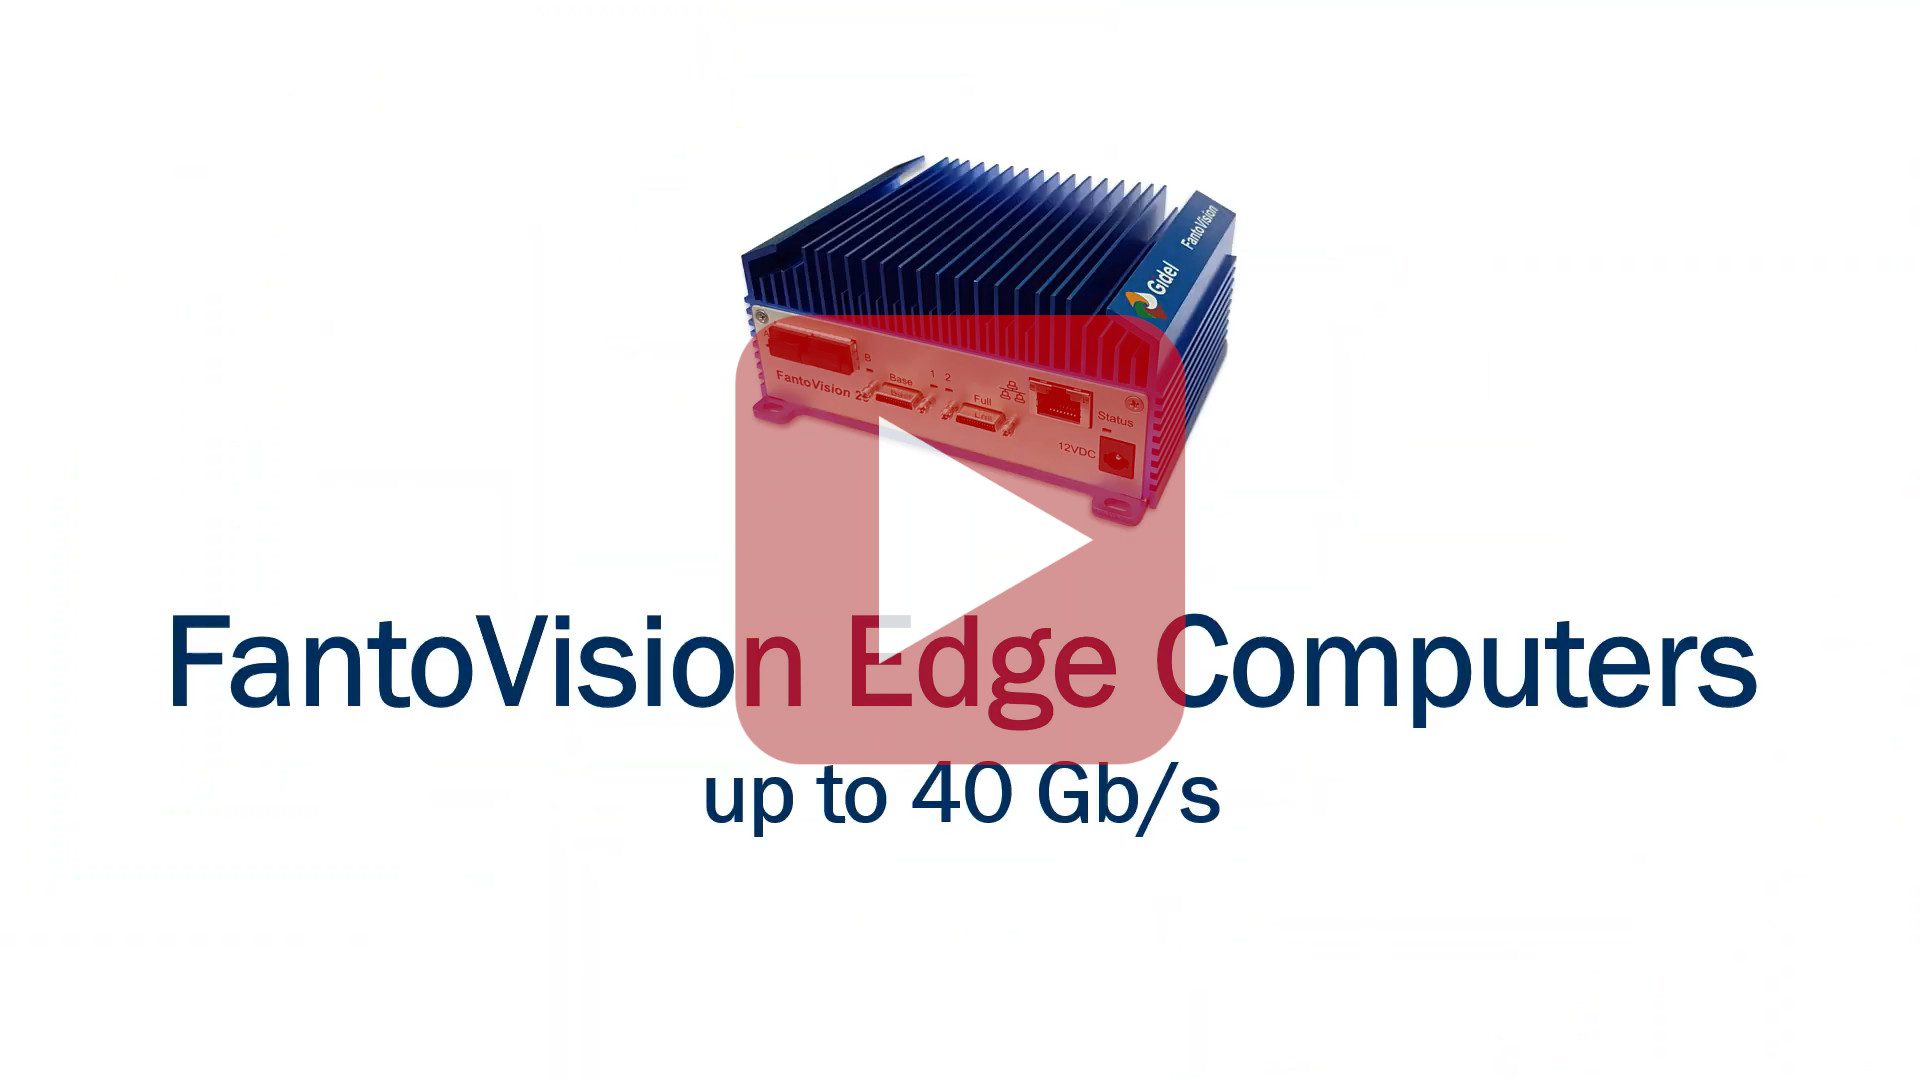 Video: FantoVision presentation at Embedded World show 2022